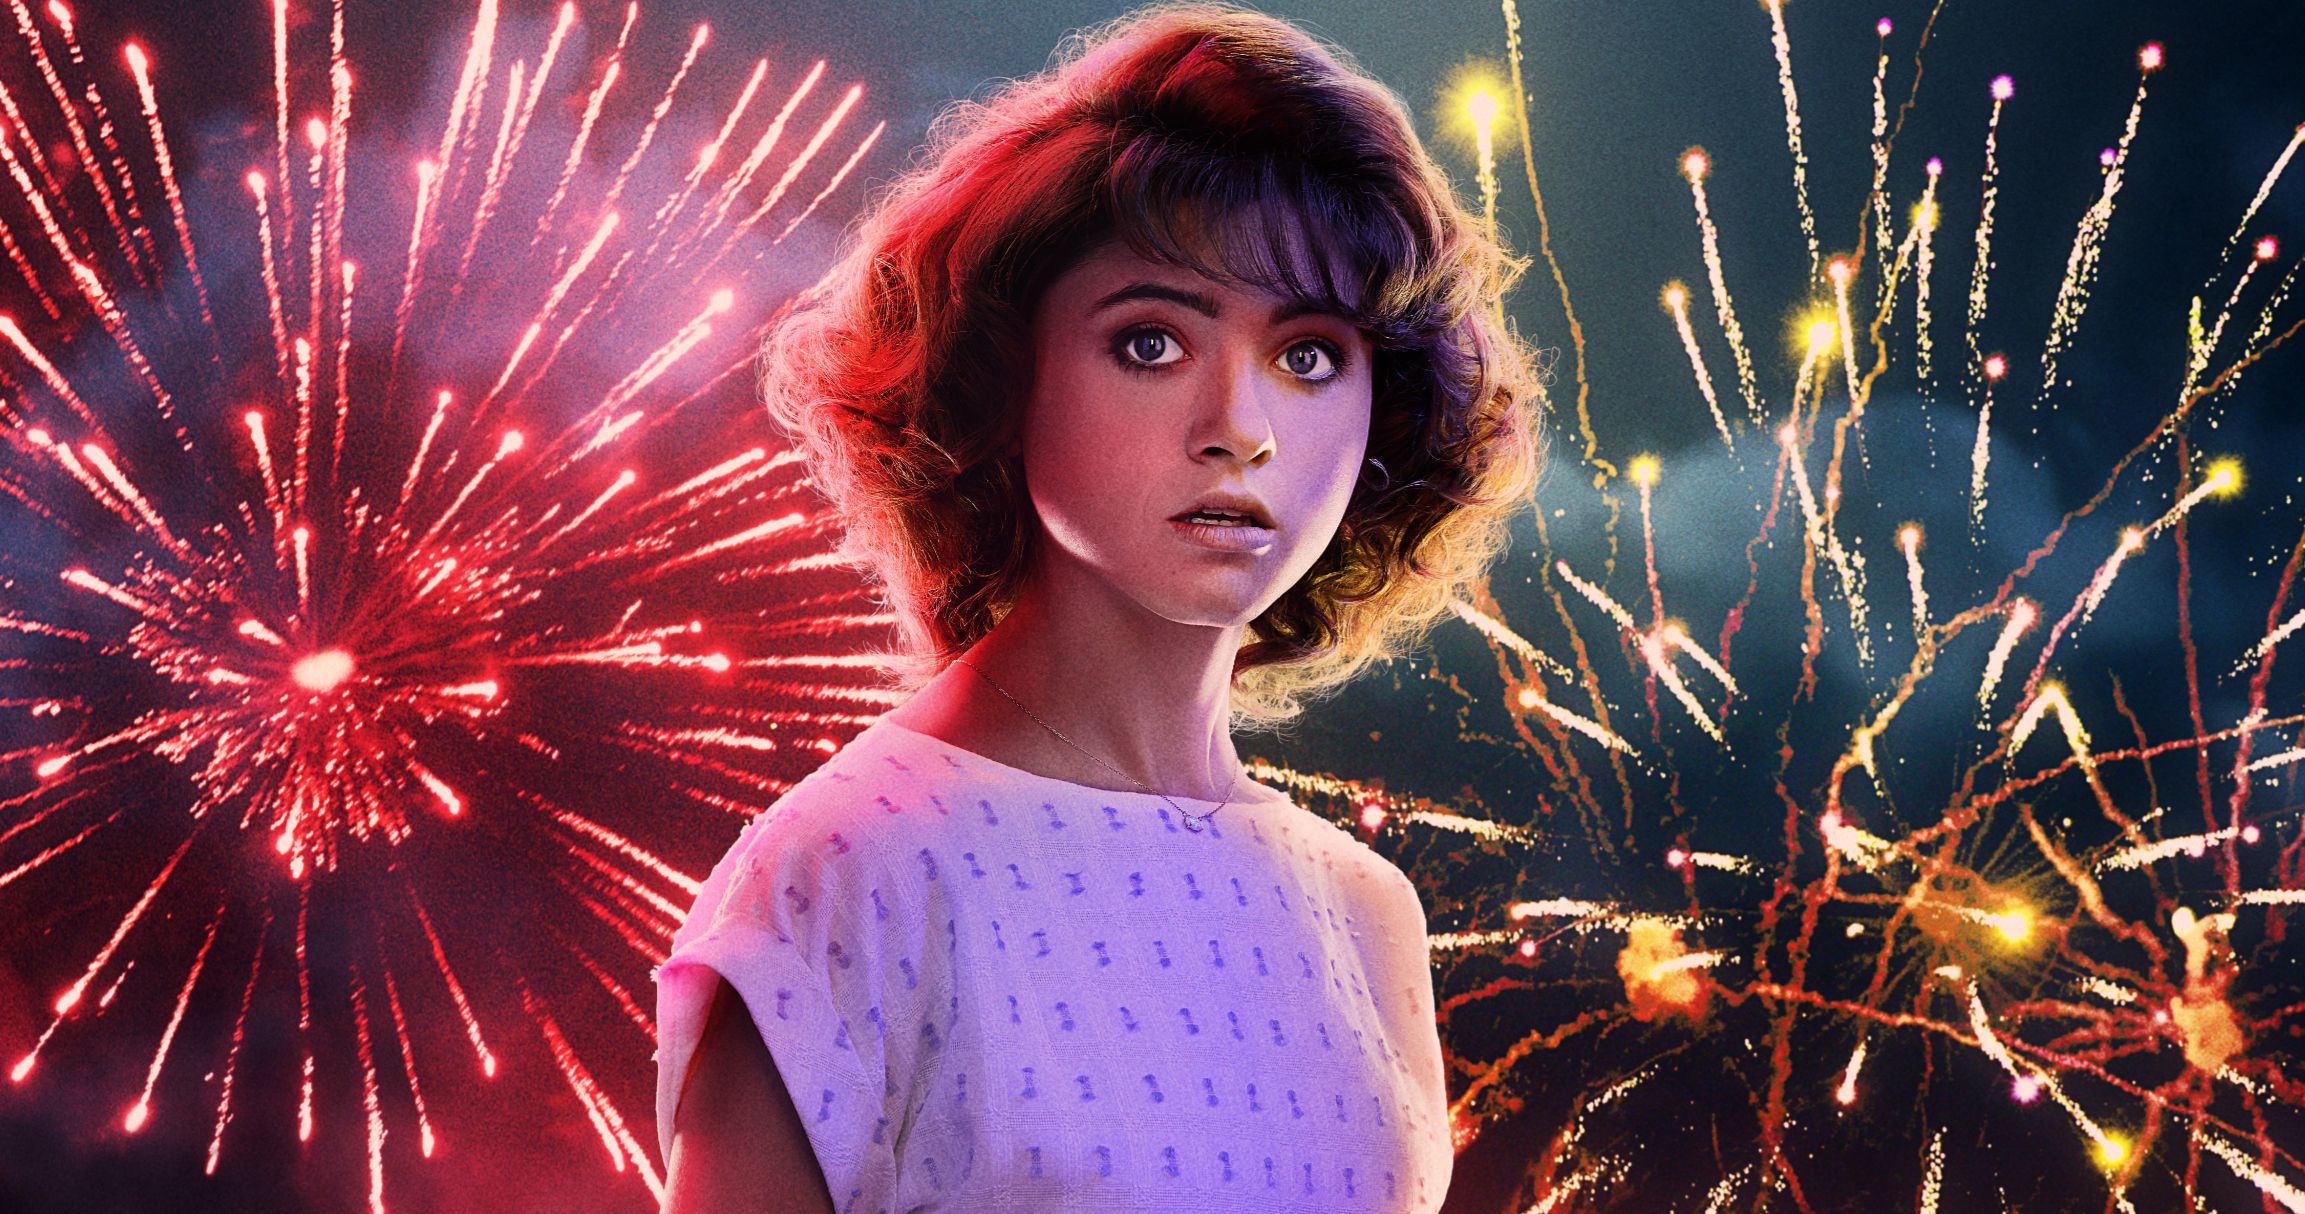 Stranger Things Season 4 Delay Could Make It the Best Yet According to Natalia Dyer